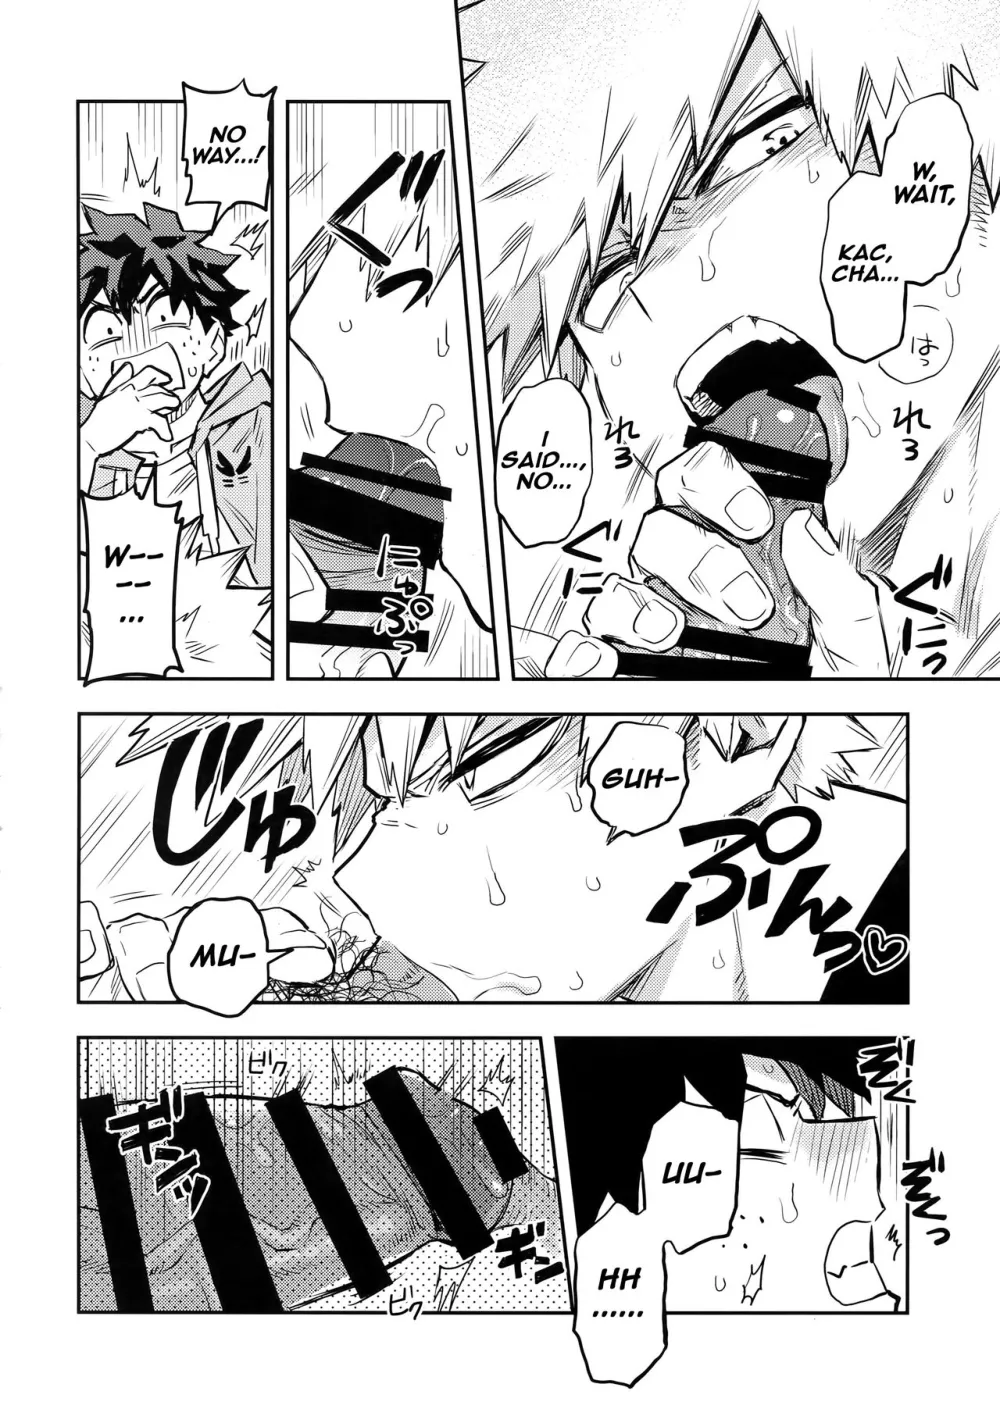 The Battle Between Sick Kacchan and Me - Page 9